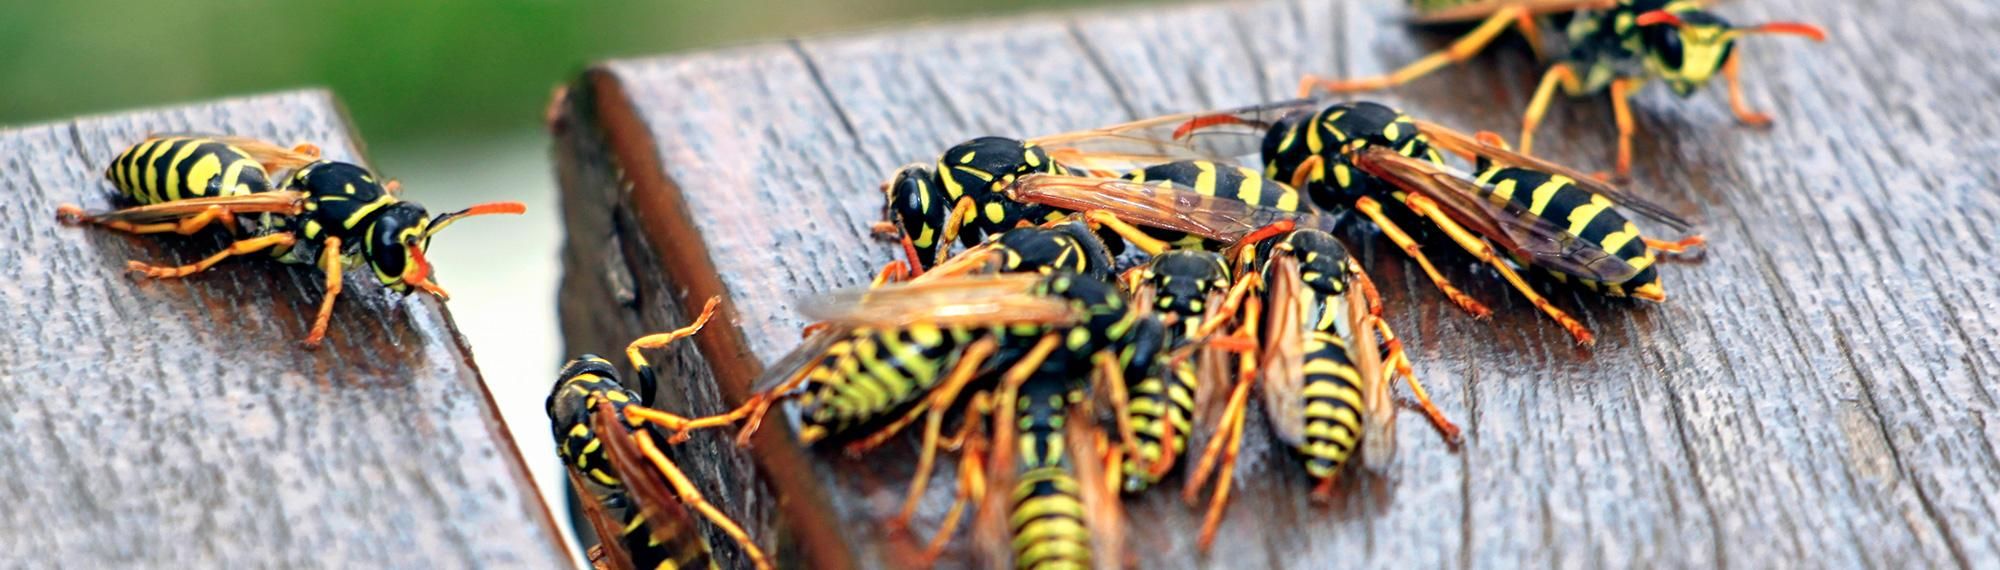 yellow jackets searching for food on a picnic table